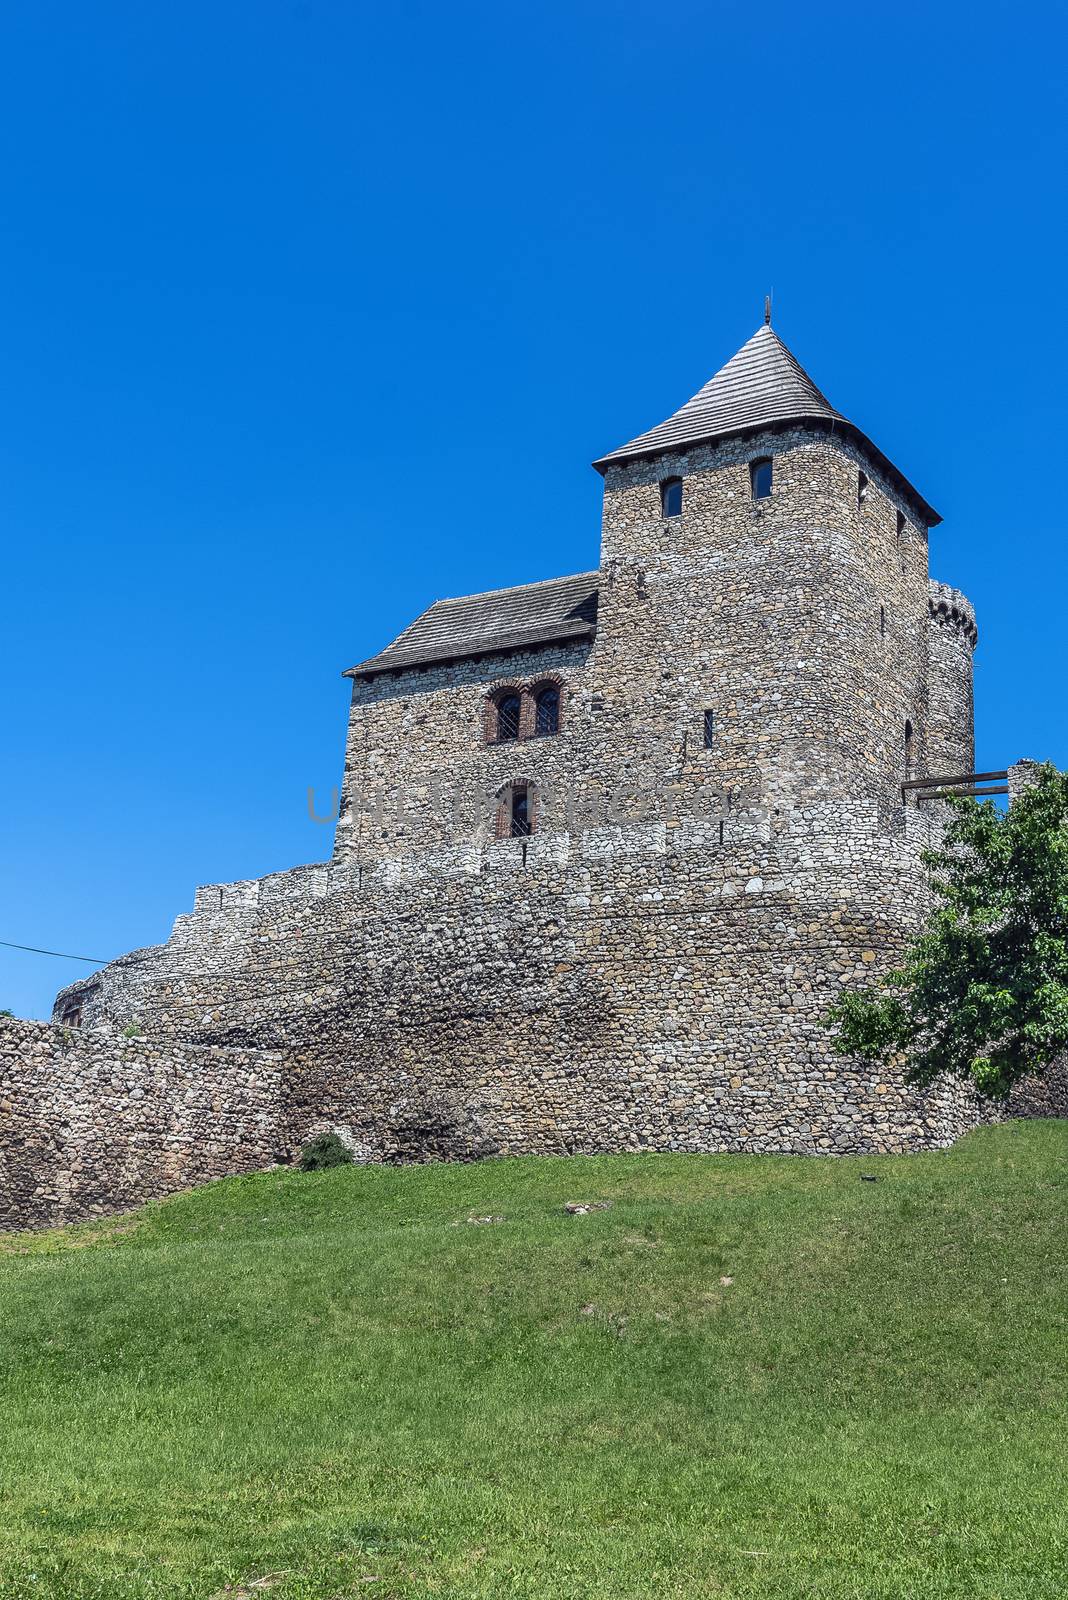 The Bedzin Castle, a medieval fortified stronghold built by King Casimir the Great in the forties of 14th century.